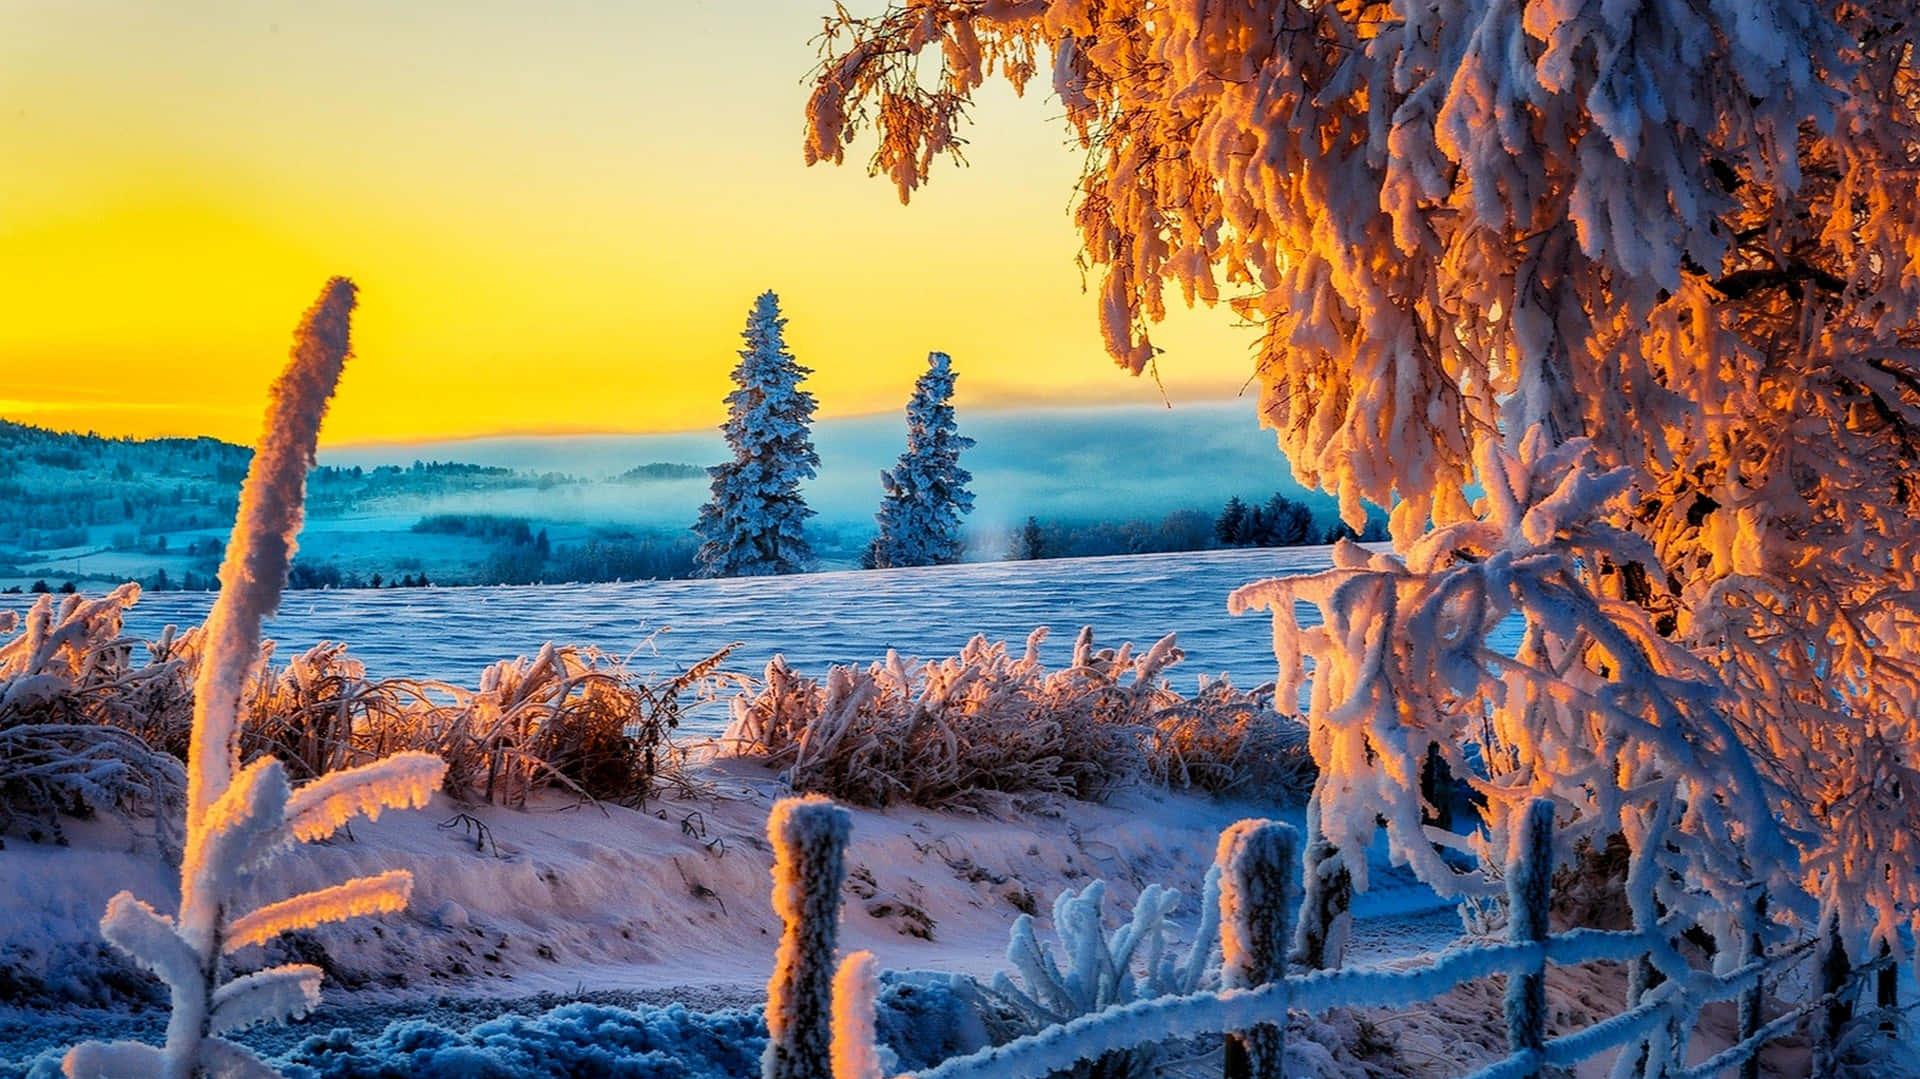 Winter Sunset A Snowy Landscape Bathed In The Warm Glow